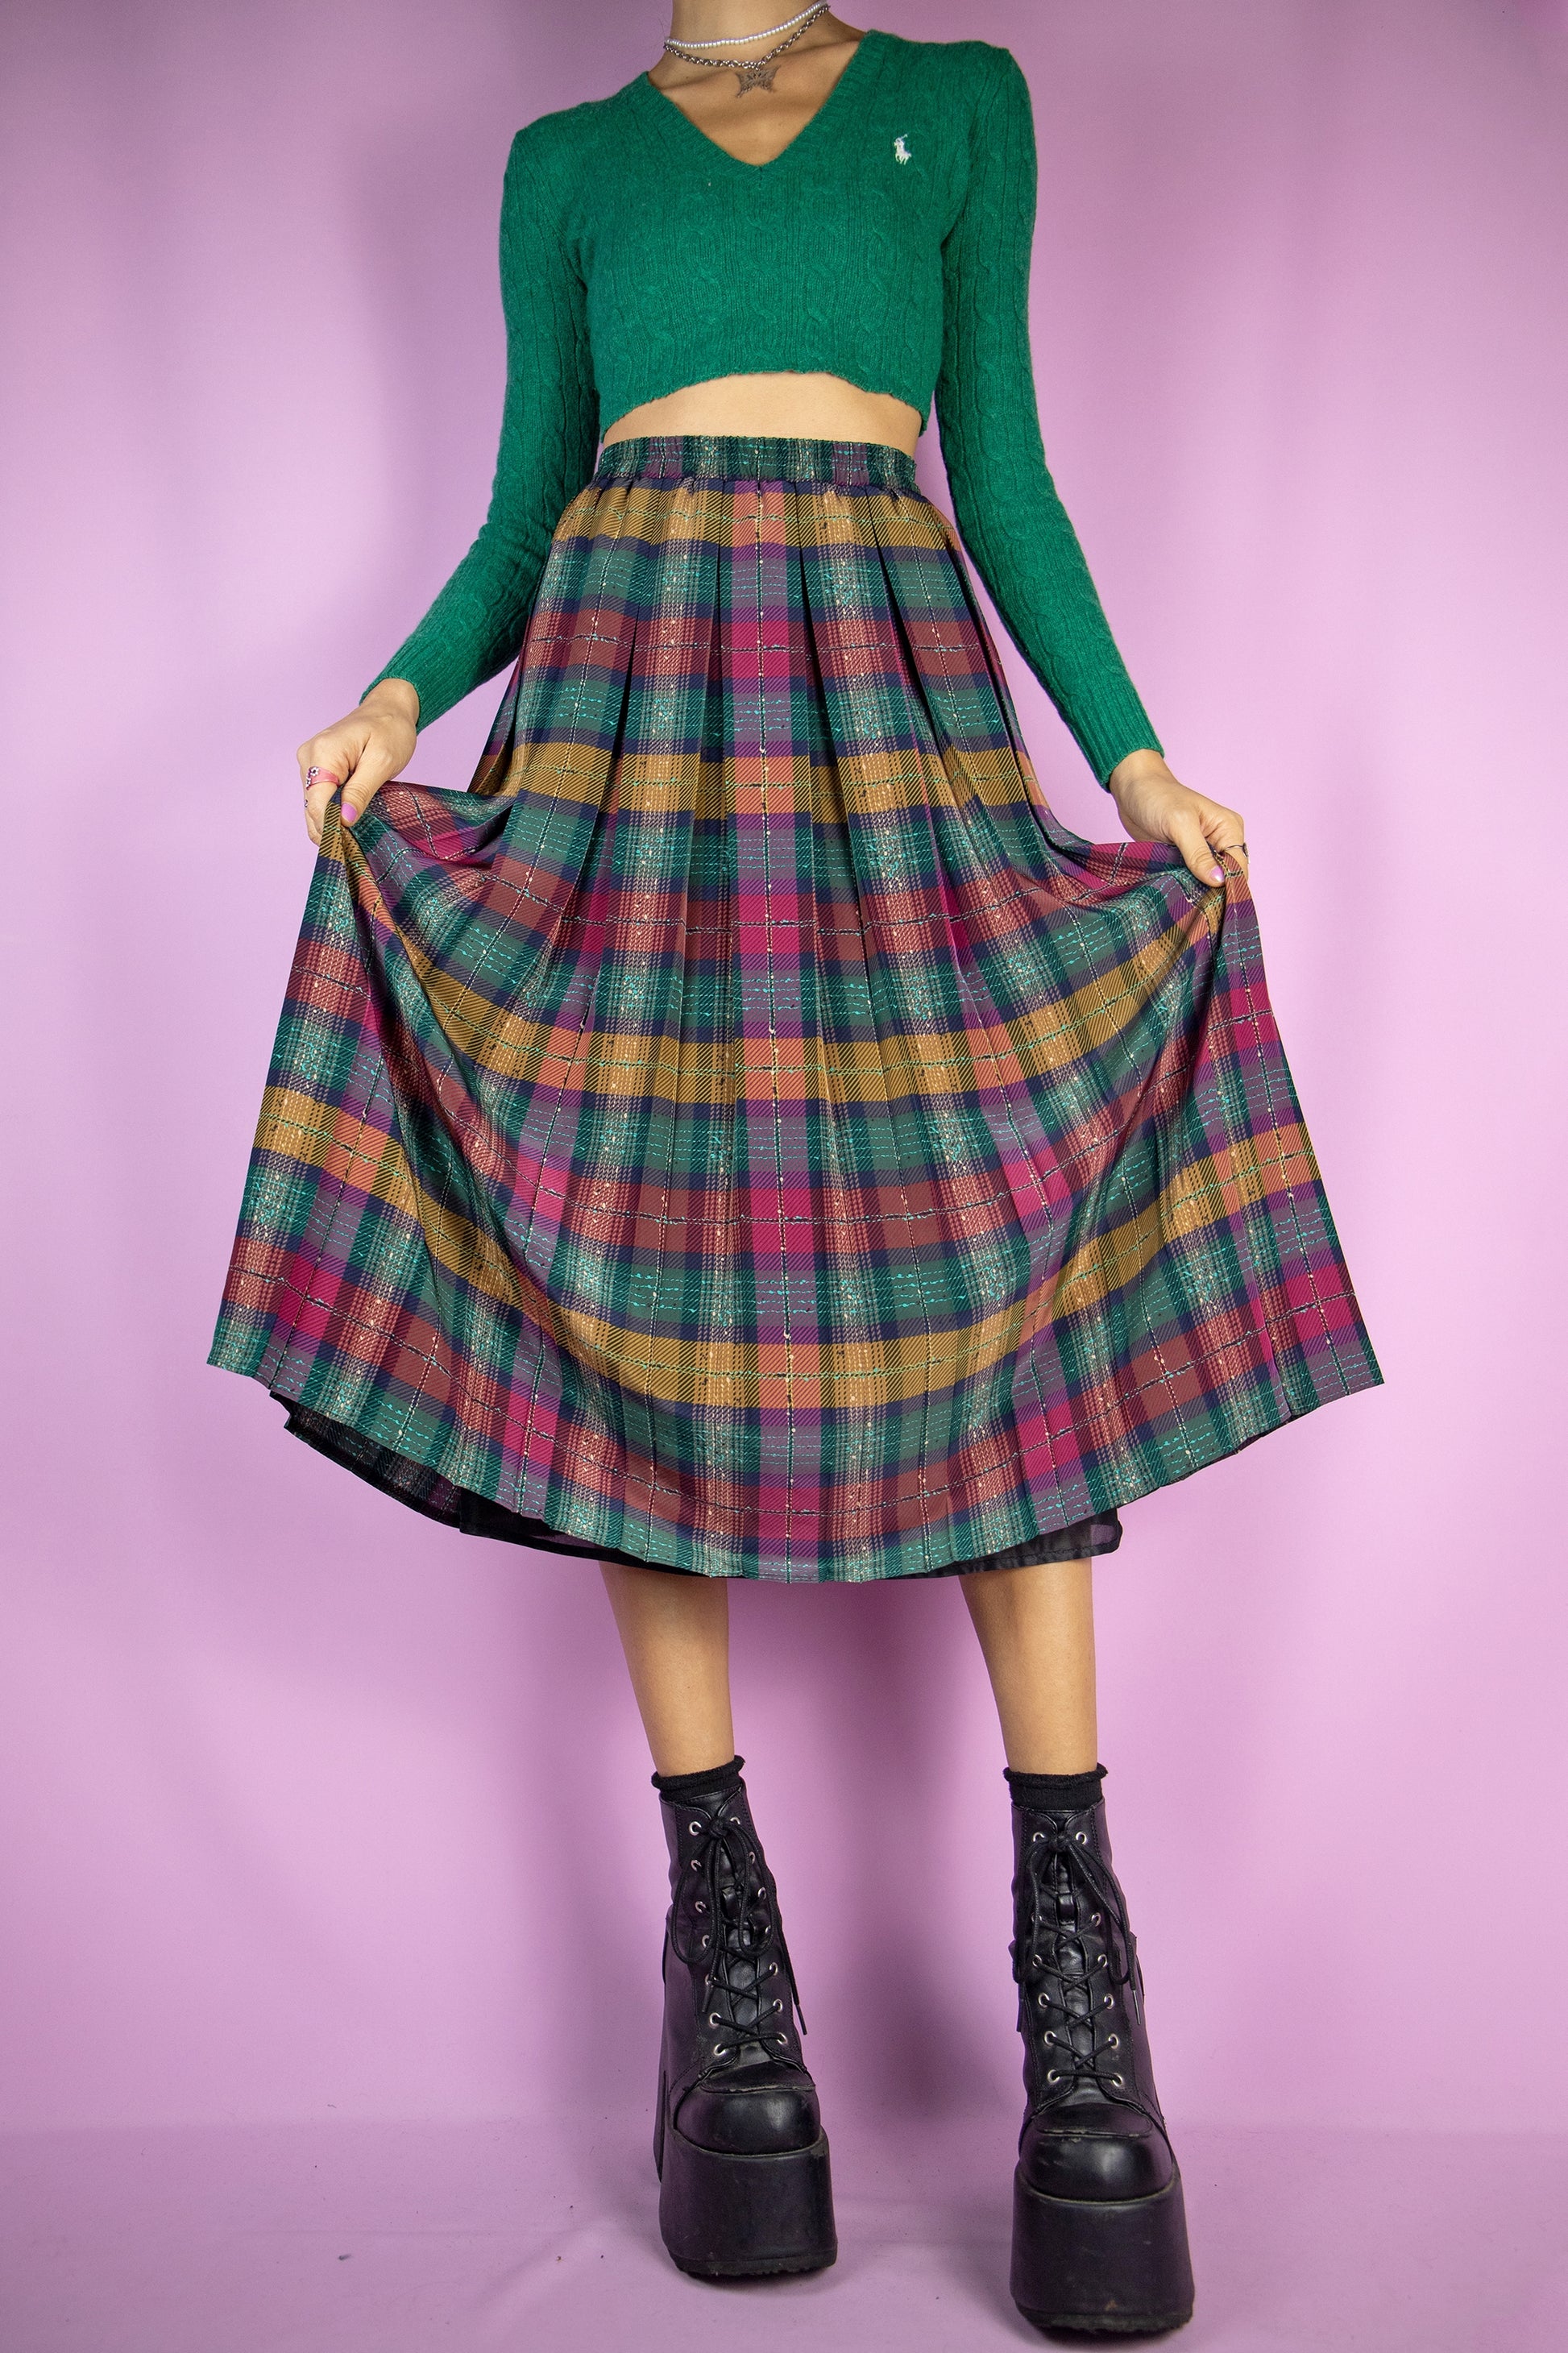 The Vintage 90s Plaid Pleated Midi Skirt is a classic preppy style green, maroon and mustard check pleated maxi skirt with an elasticated waist.